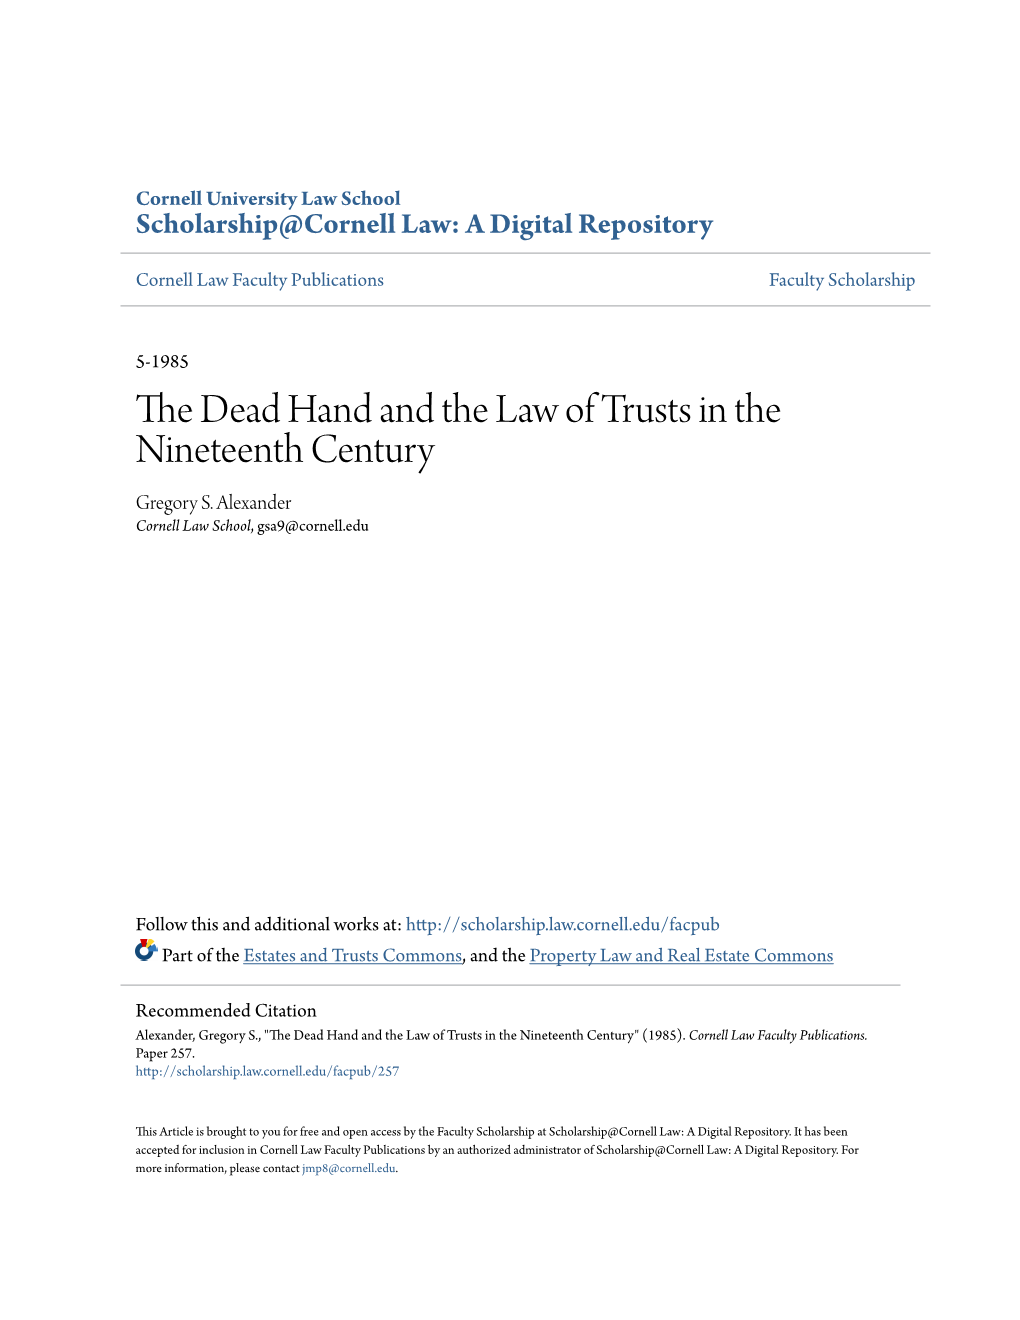 The Dead Hand and the Law of Trusts in the Nineteenth Century